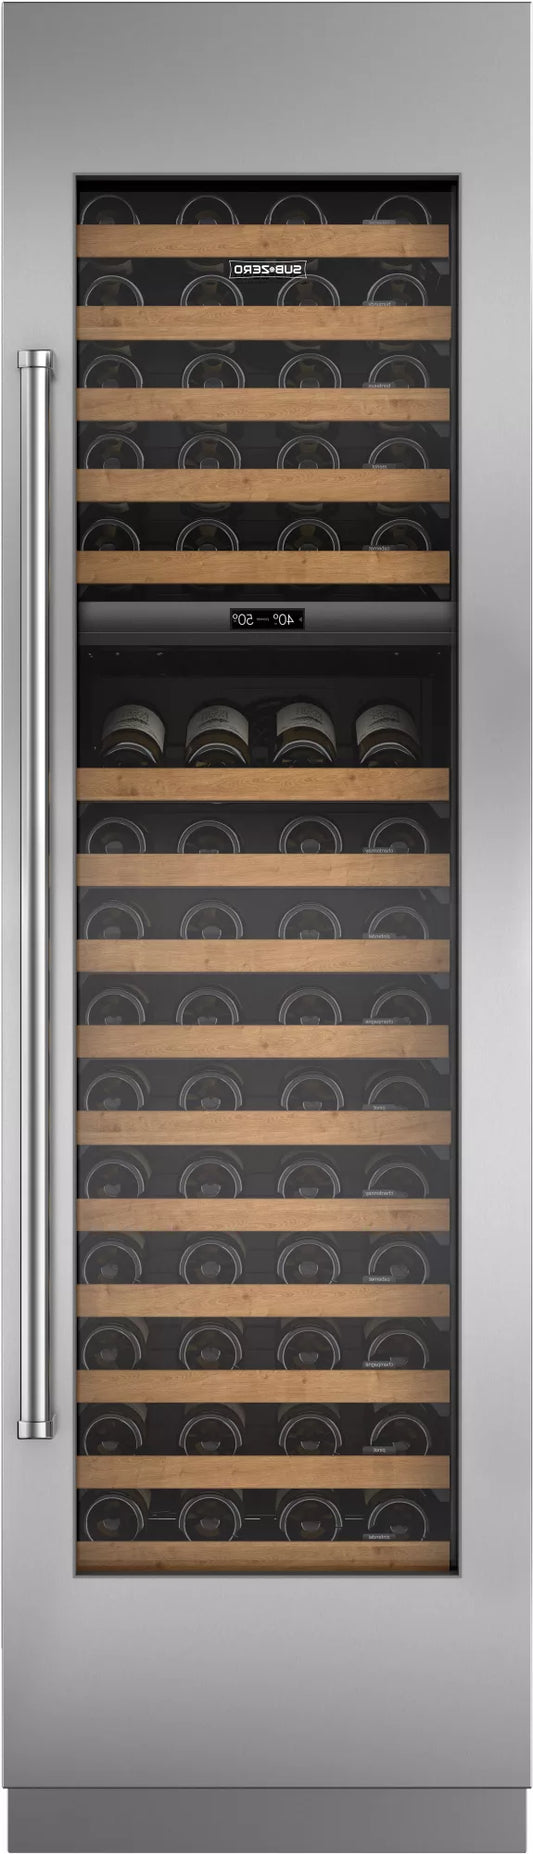 Sub-Zero  IW24RH 24 Inch Smart Wine Storage with 102-Bottle, 15 Cherrywood-Faced Shelves, Dual Temperature Zones, Star-K Certified Sabbath Mode and Digital Touch Sensor Control Panel  Right Hinge Door Swing , 369448